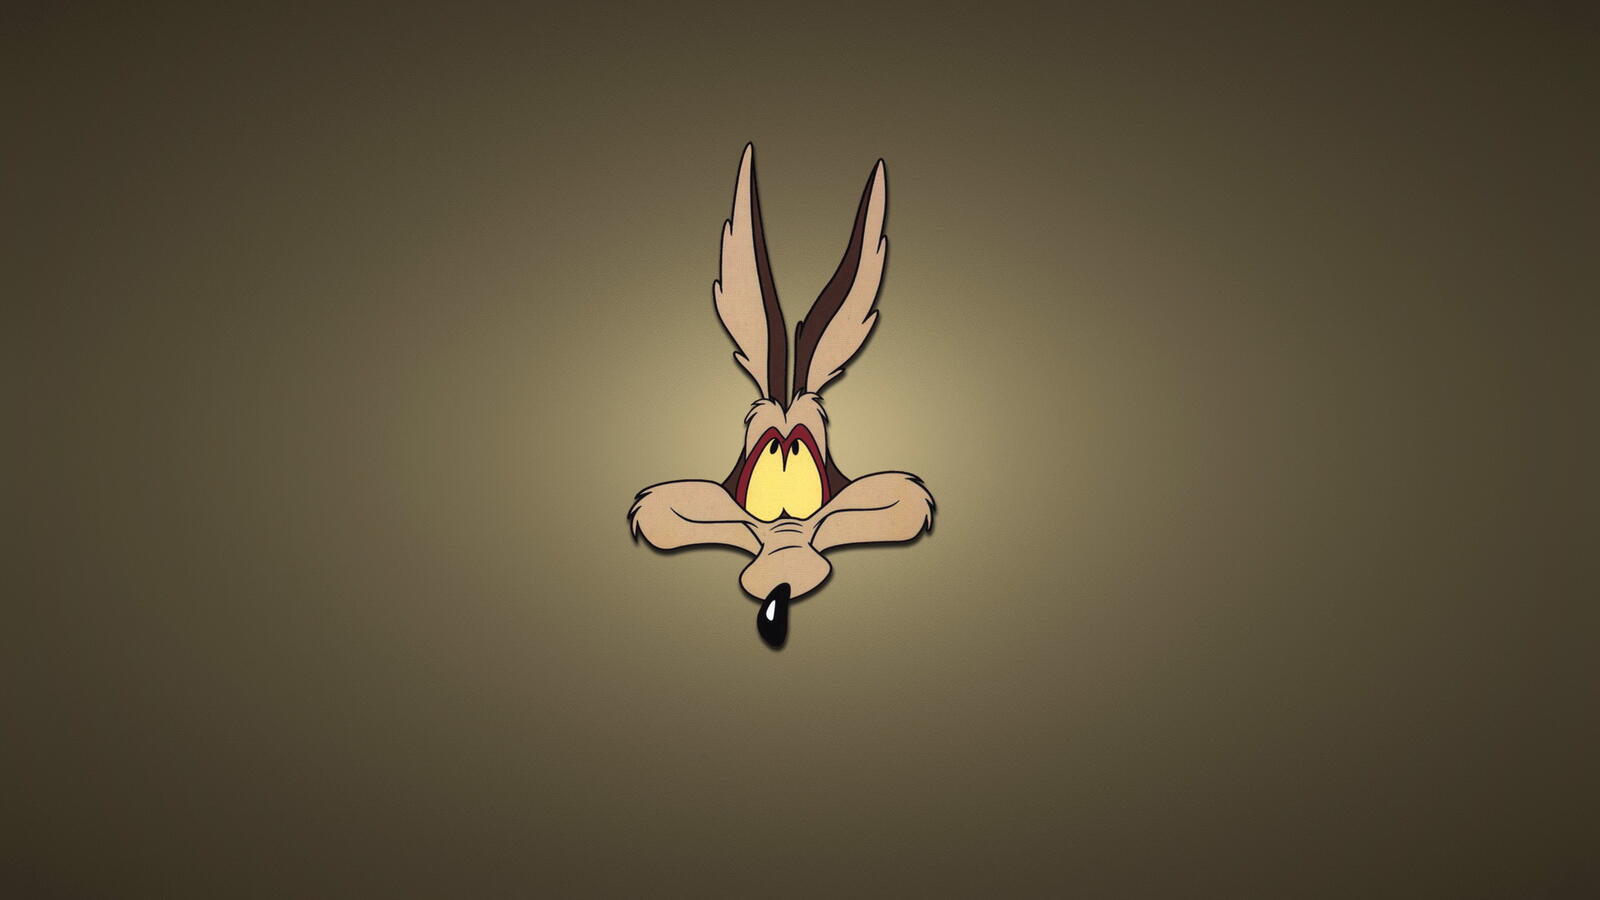 Free photo A drawing of a cartoon Bugs Bunny